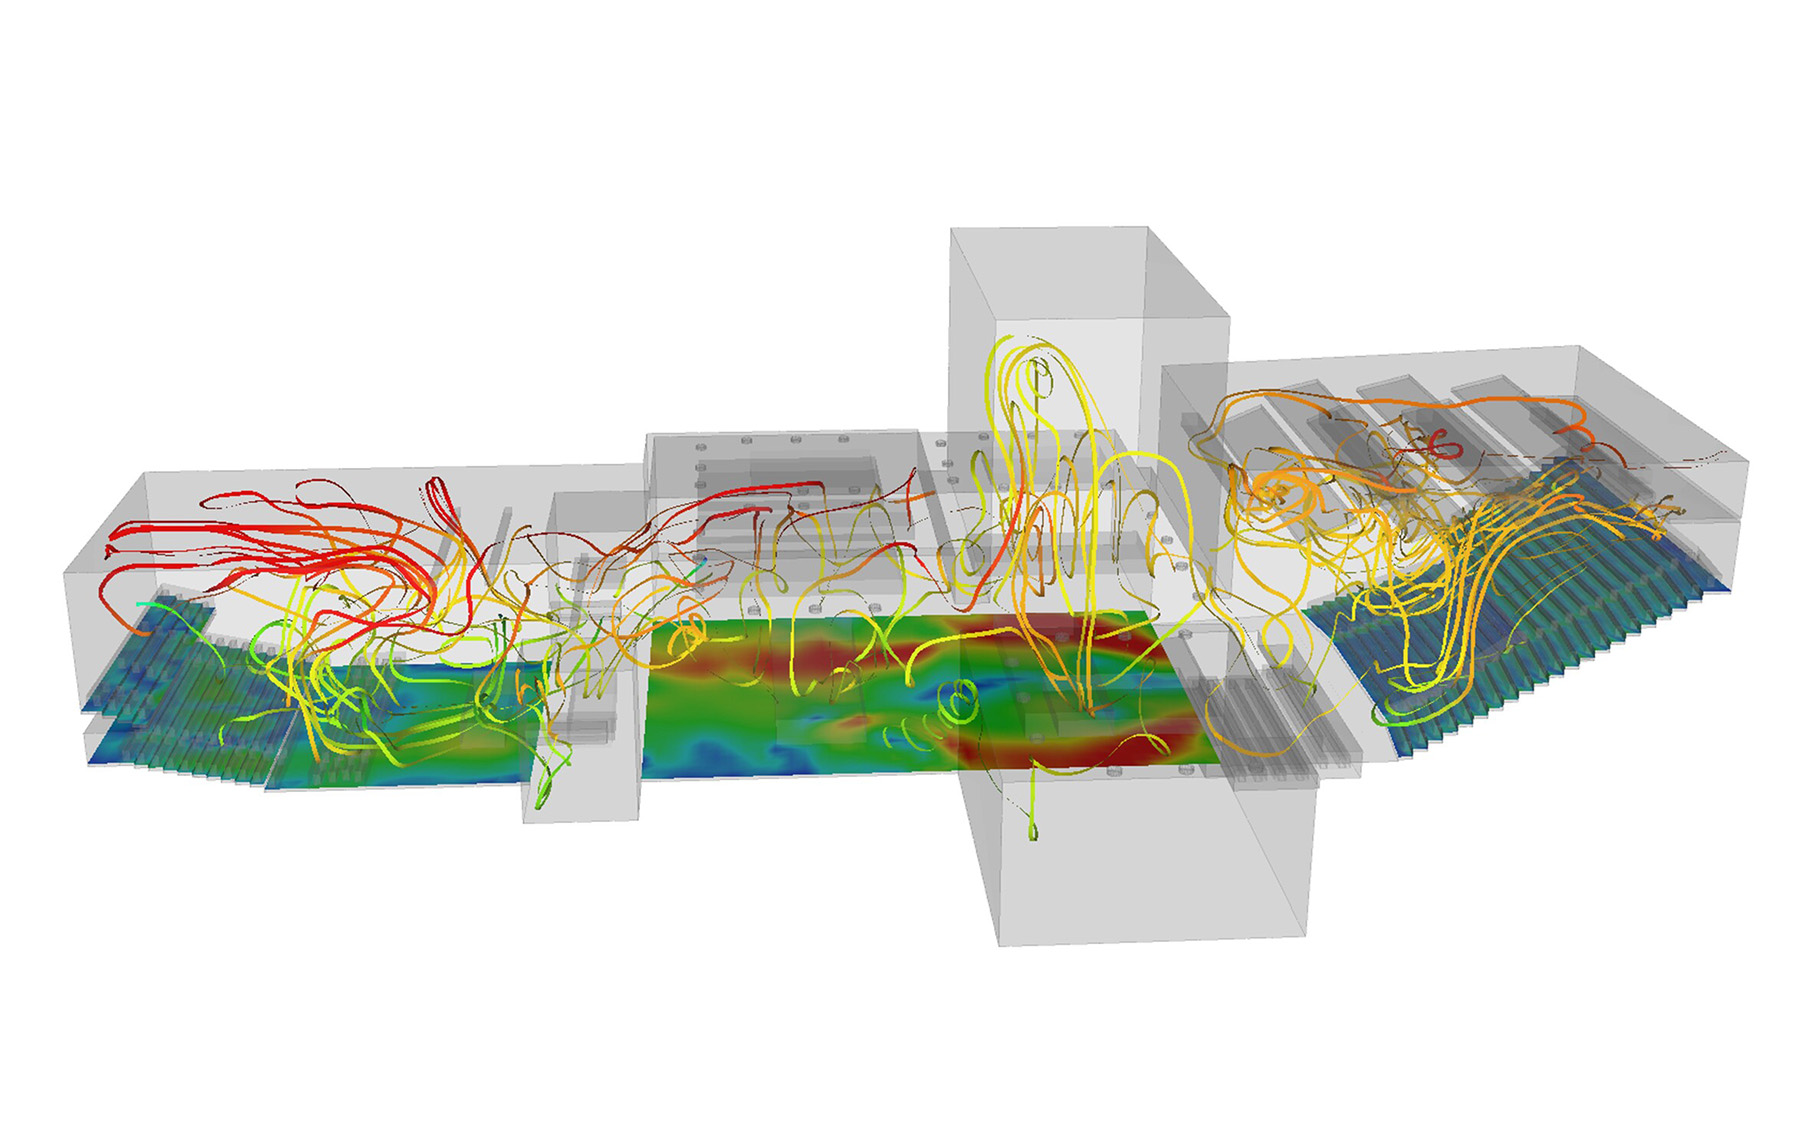 Multicolored image shows airflow dynamics analysis. 